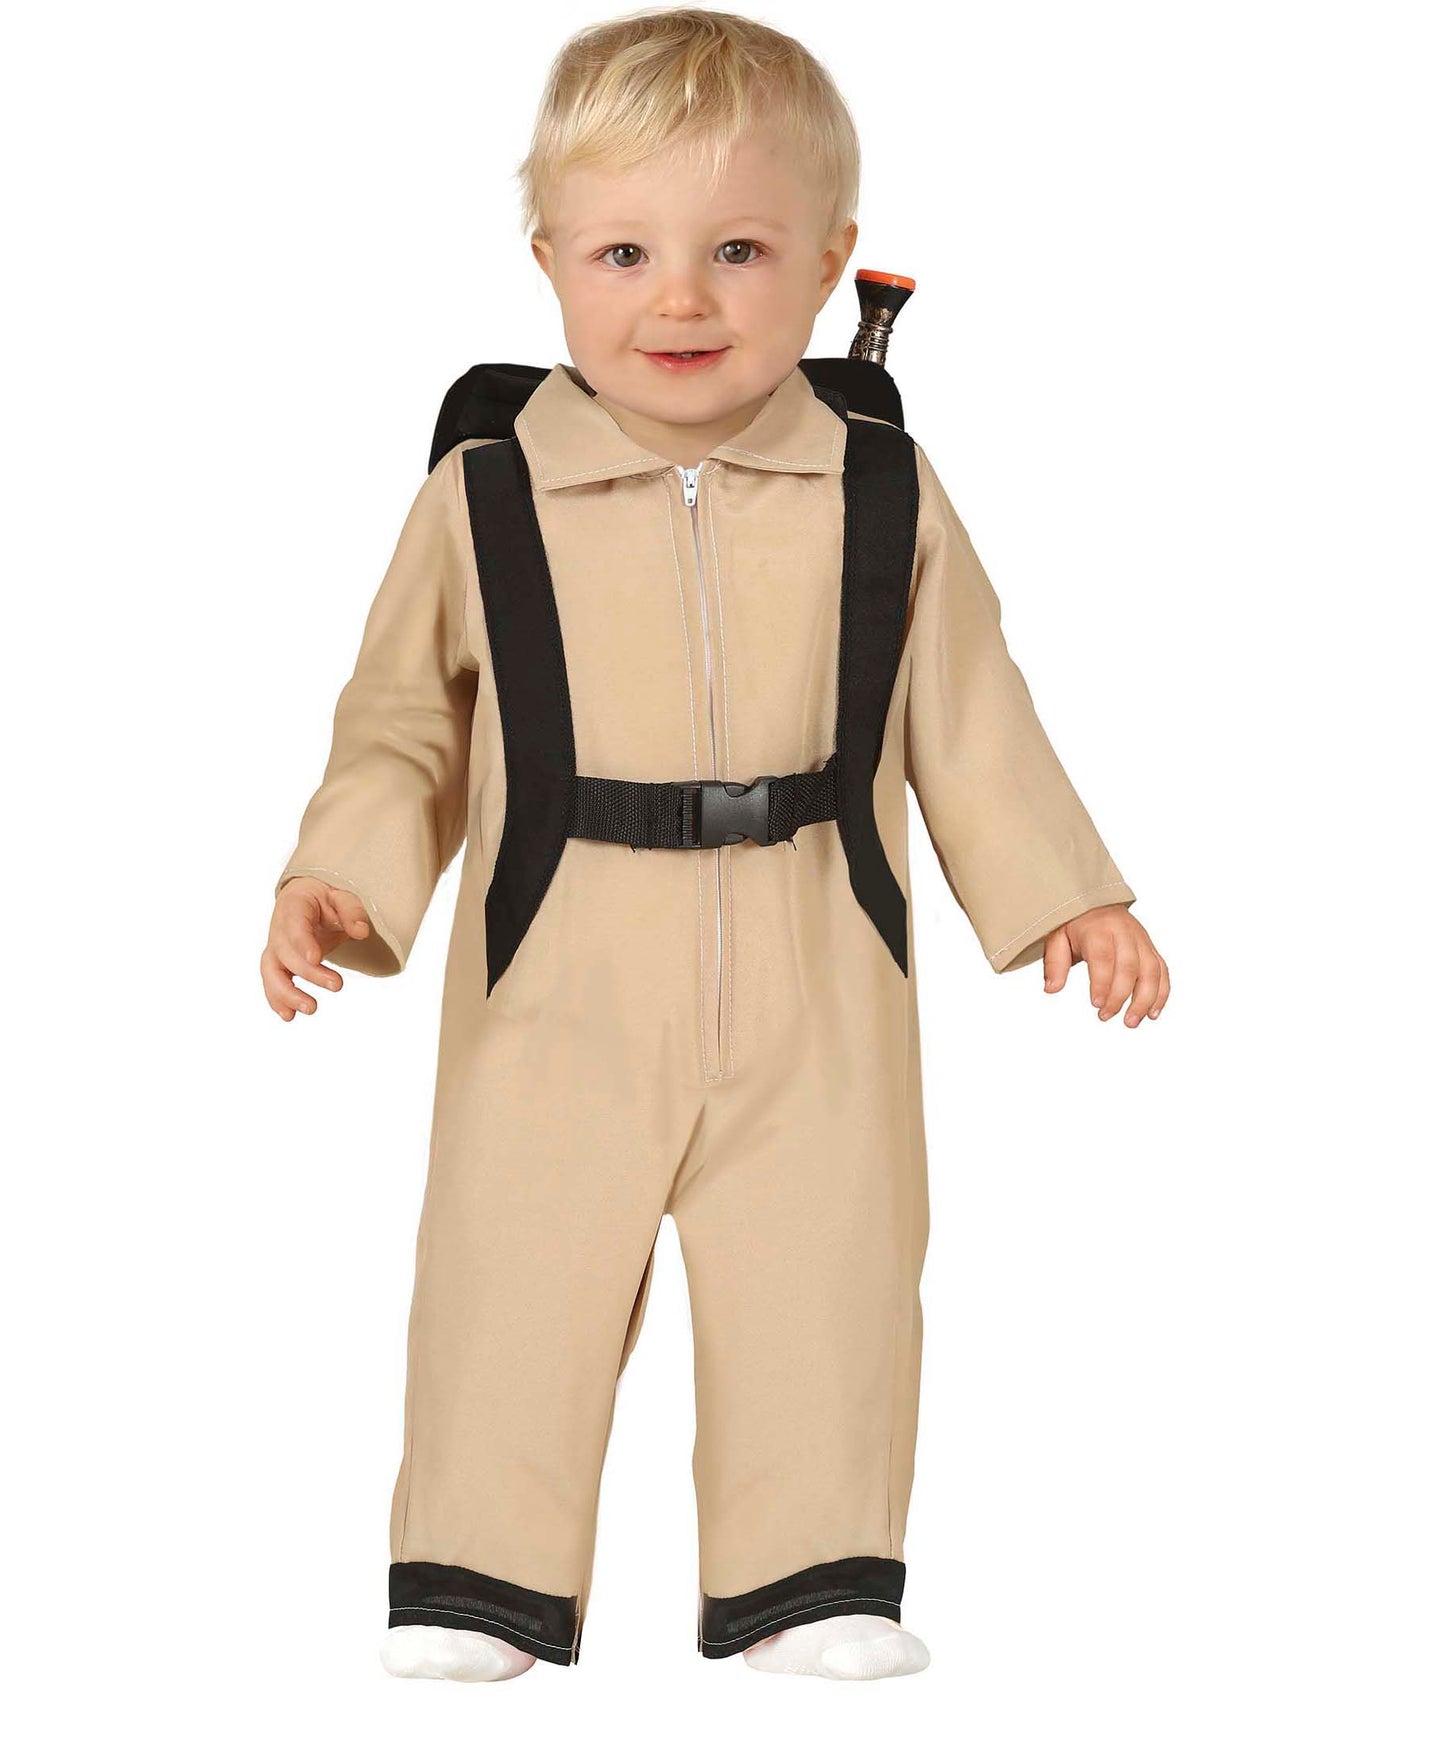 Baby Ghostbuster Costume